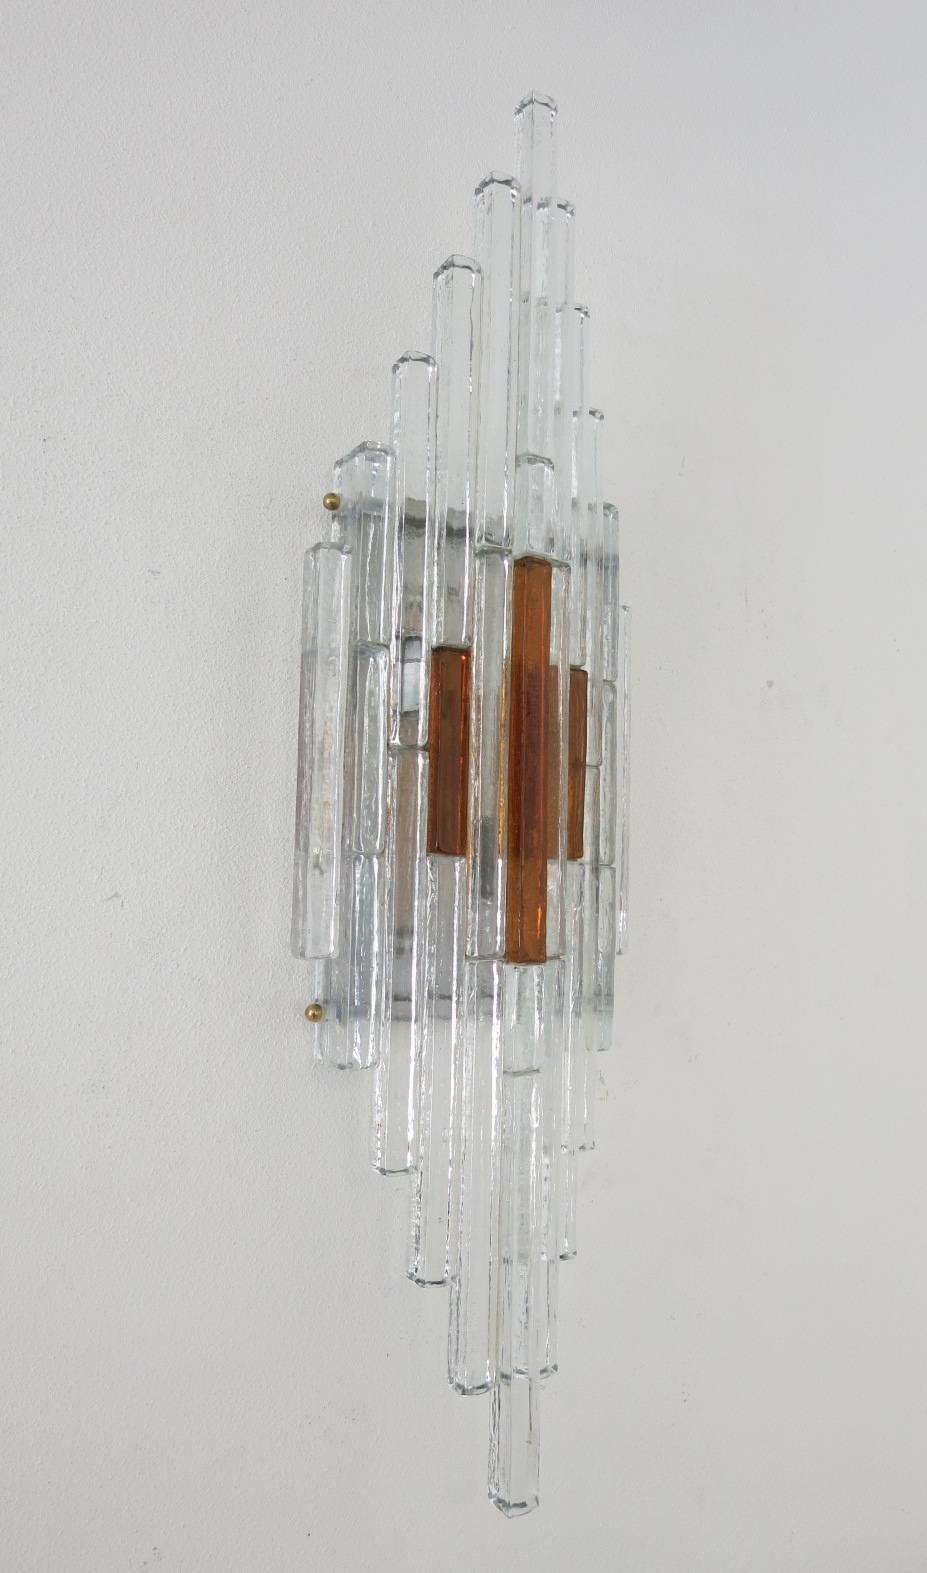 Vintage Italian wall light with clear and amber Murano glass rectangular rods layered to create a singular diagonal glass sculpture, mounted on chrome back plate / Designed by Poliarte, circa 1960s / Made in Italy
2 lights / E12 or E14 type / max